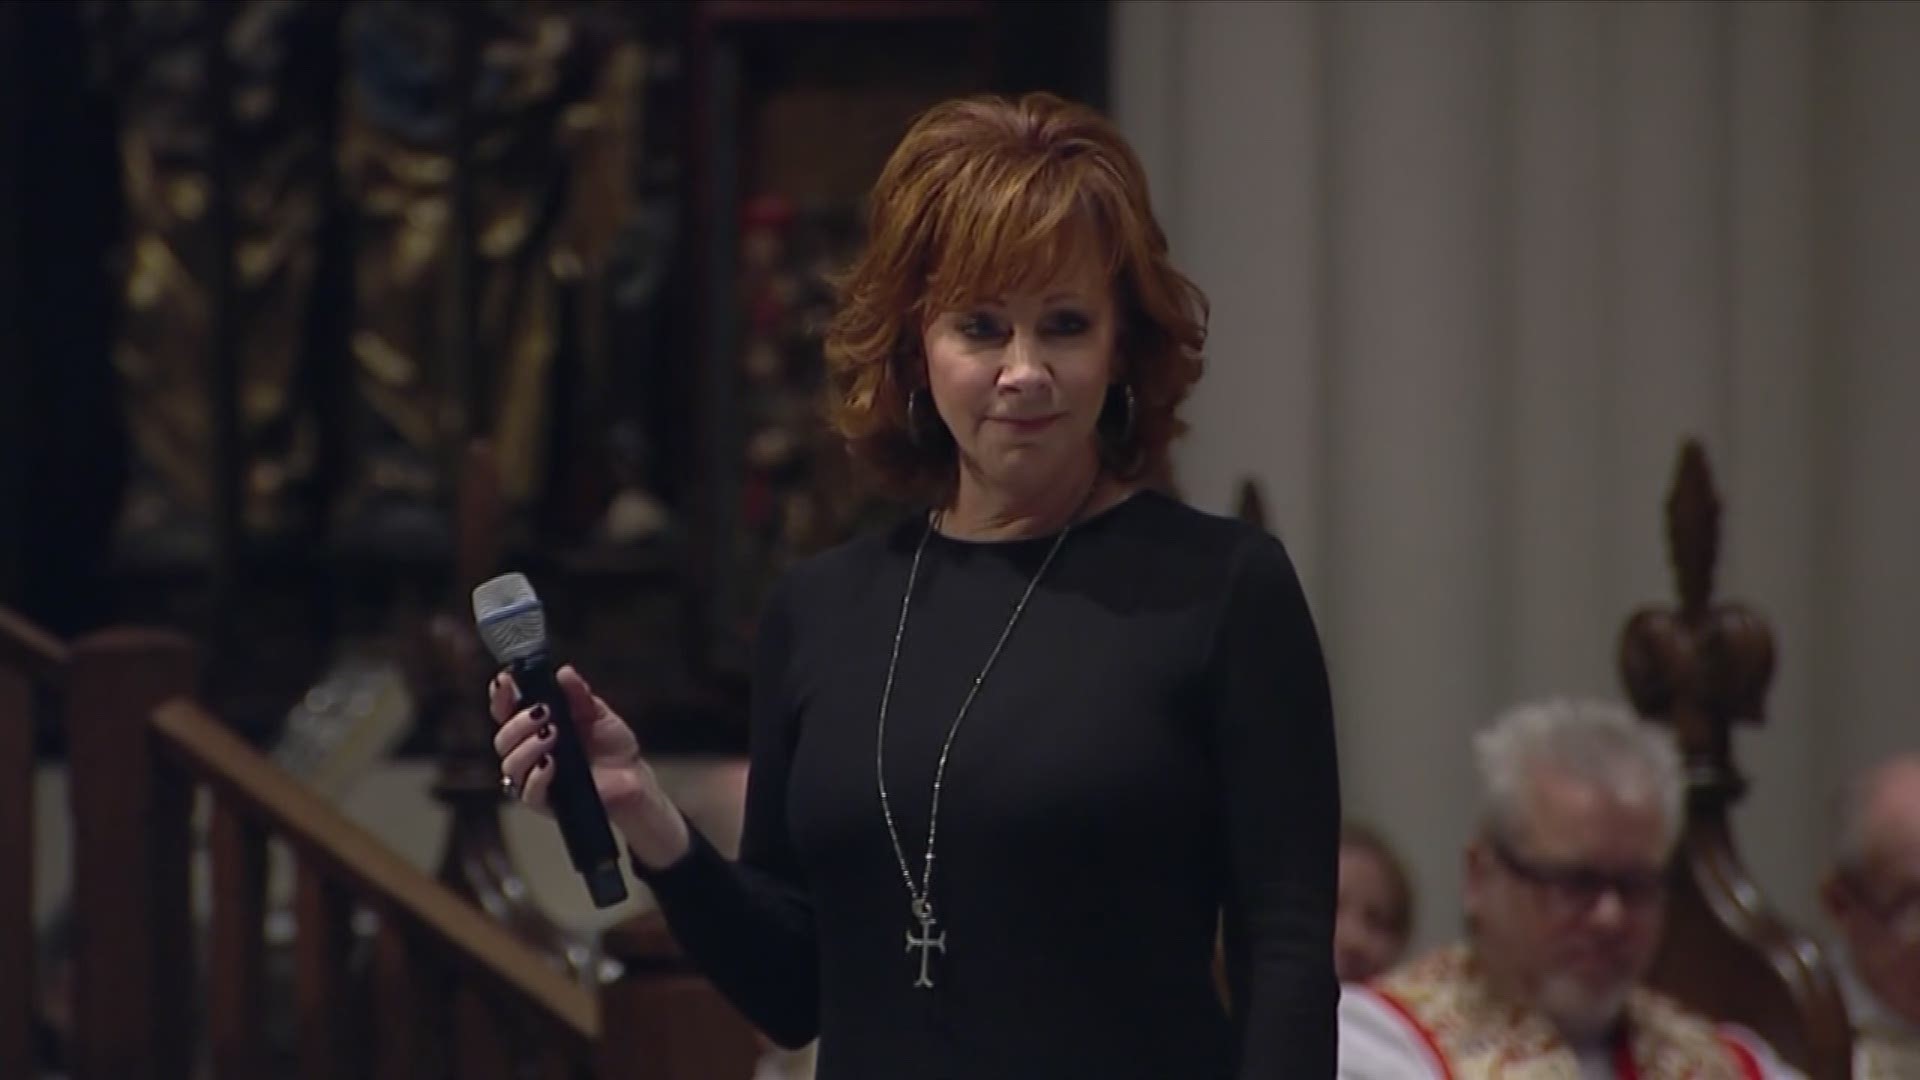 Reba McEntire sang 'The Lord's Prayer' during George H.W. Bush's funeral in Houston on Thursday.